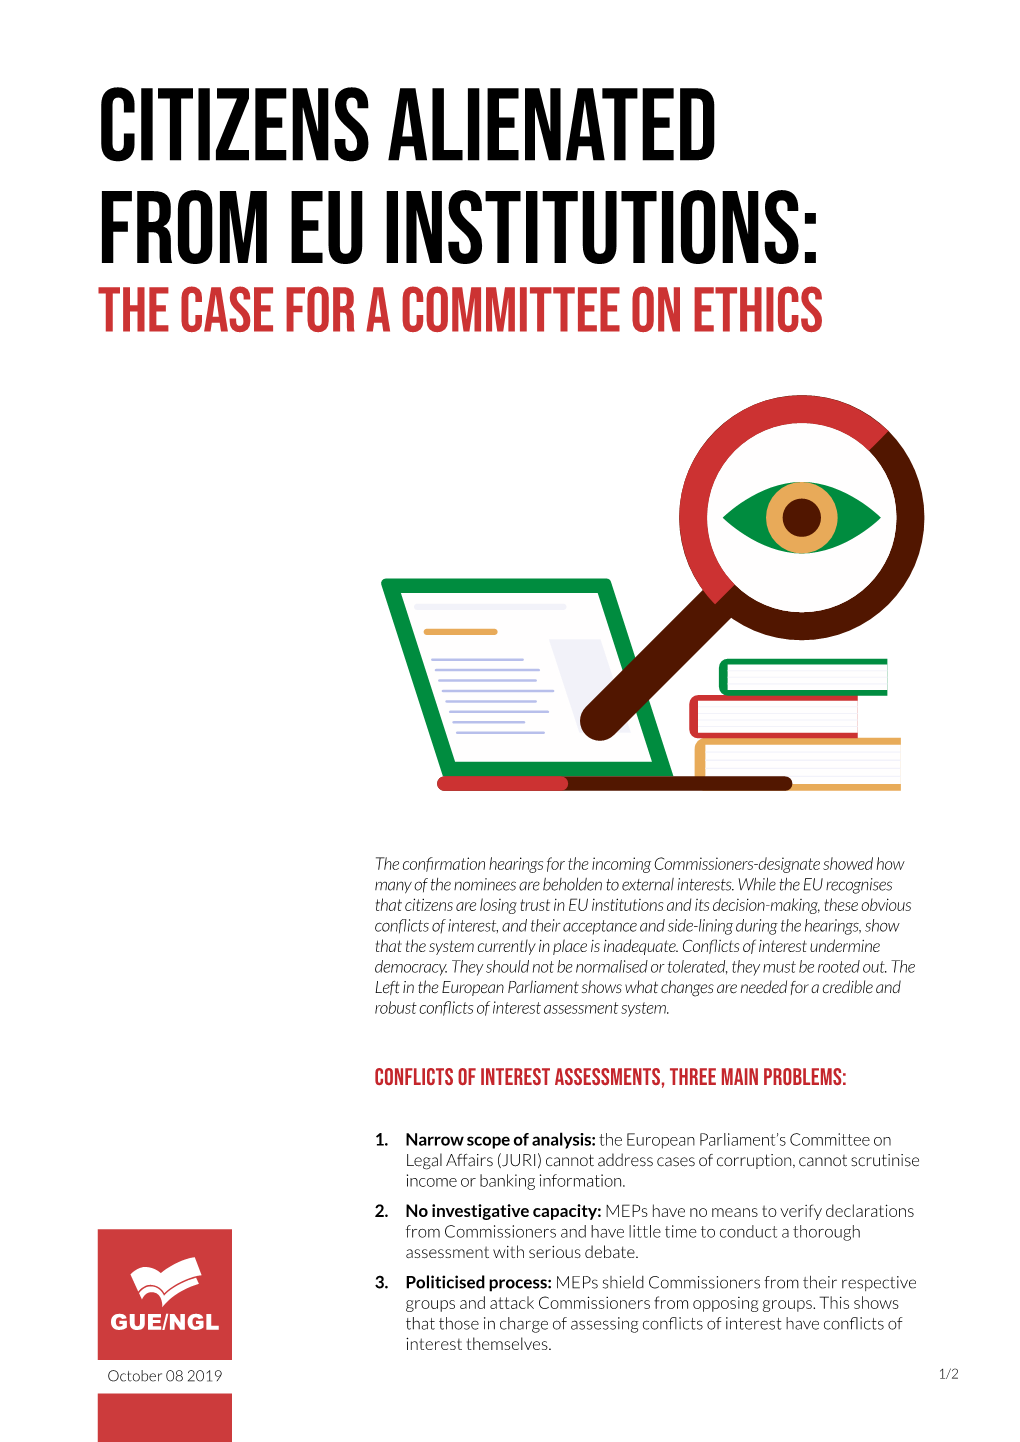 Citizens Alienated from EU Institutions: the Case for a Committee on Ethics